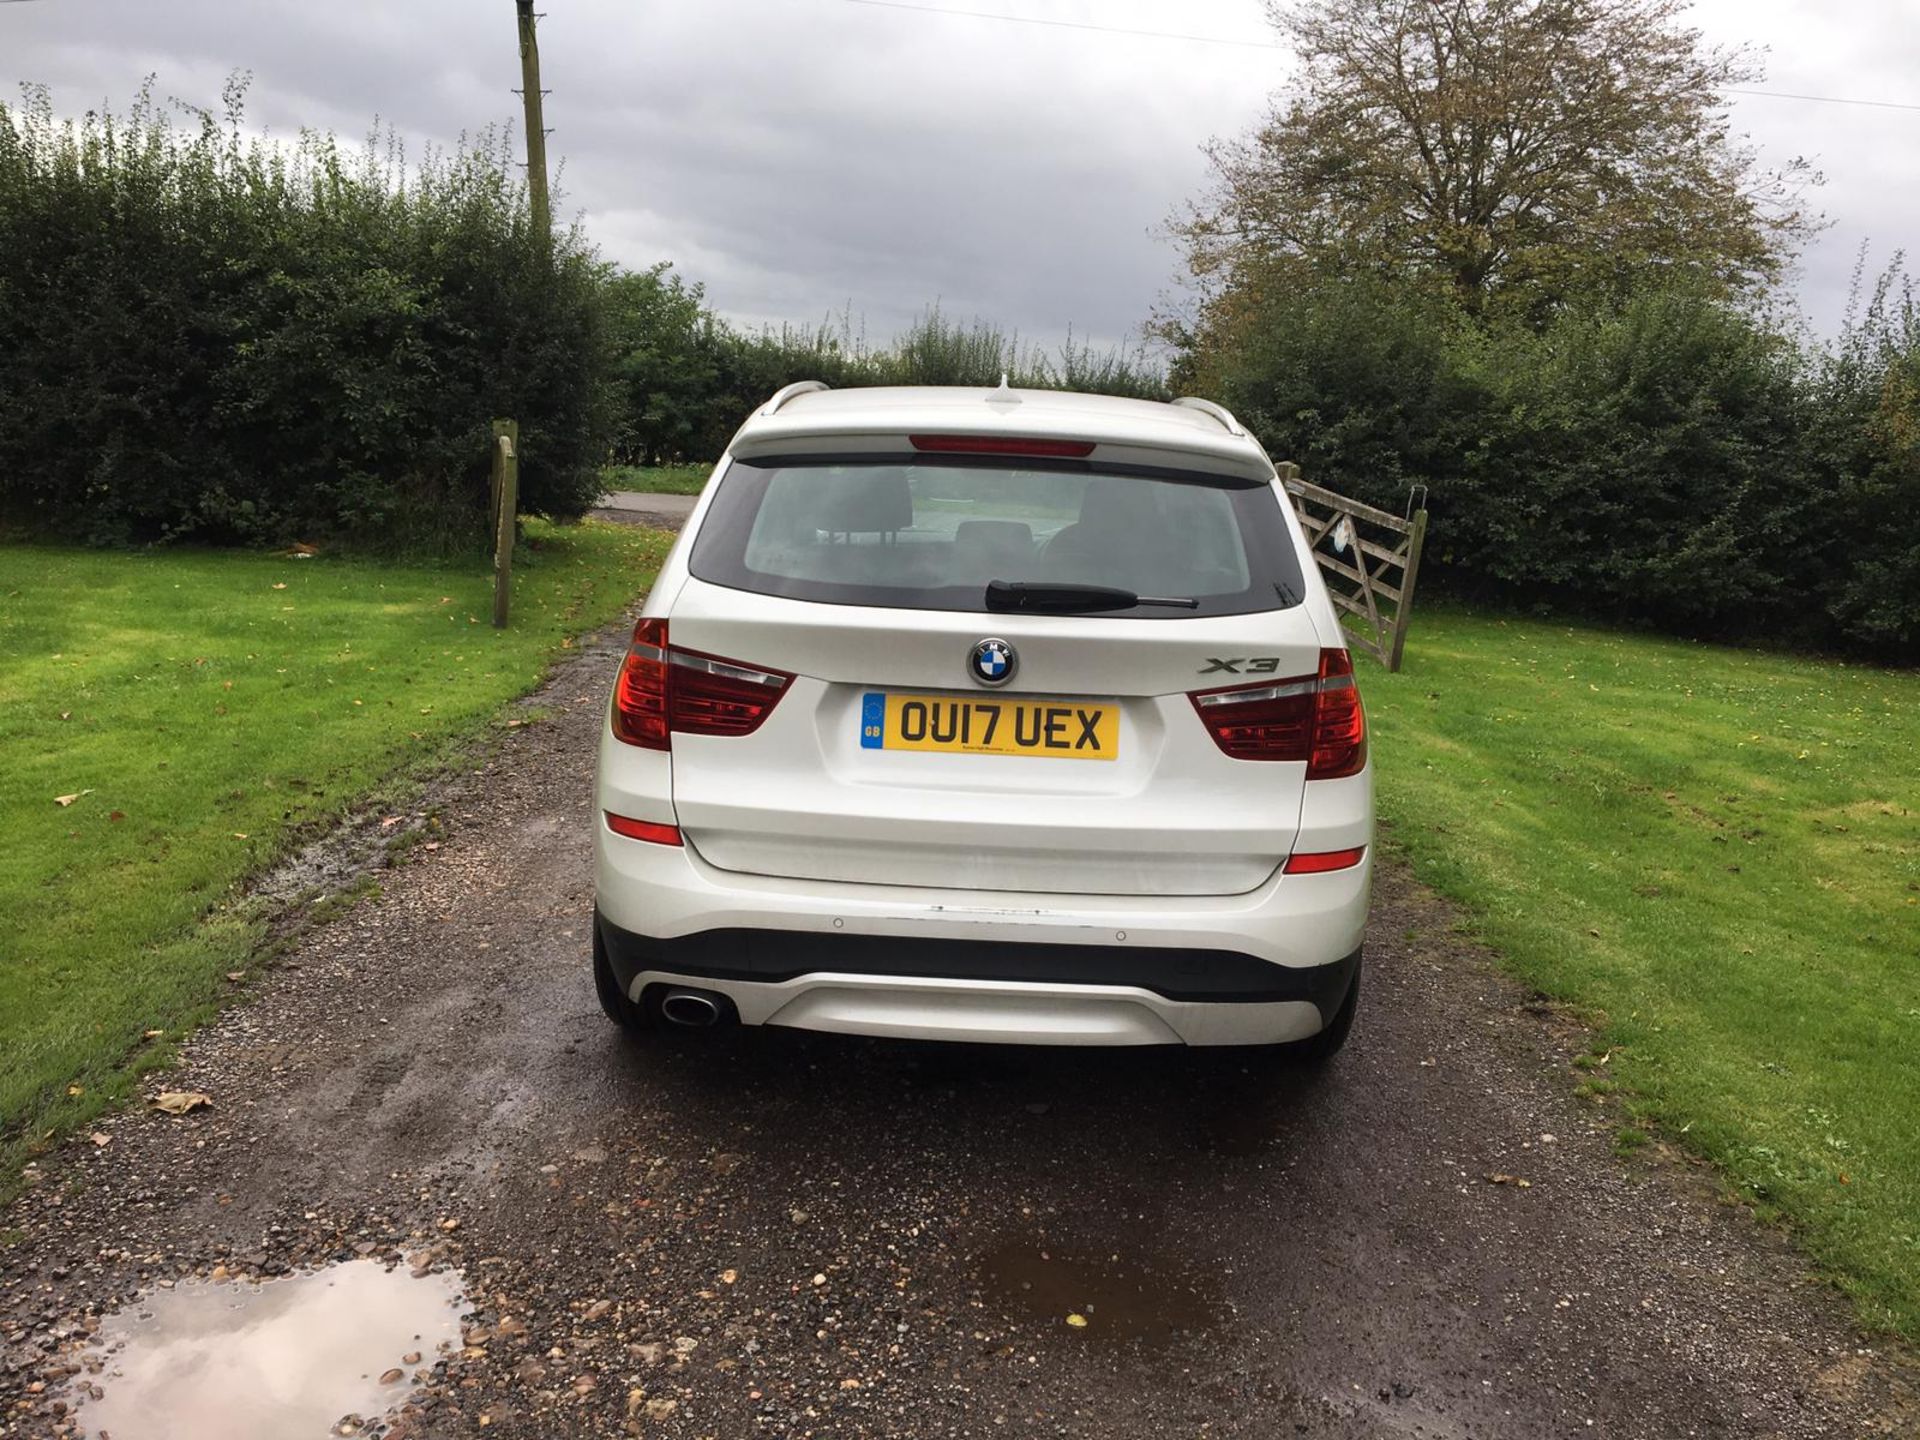 2017/17 REG BMW X3 XDRIVE 20D SE AUTO 2.0 DIESEL WHITE ESTATE, SHOWING 0 FORMER KEEPERS *NO VAT* - Image 6 of 15